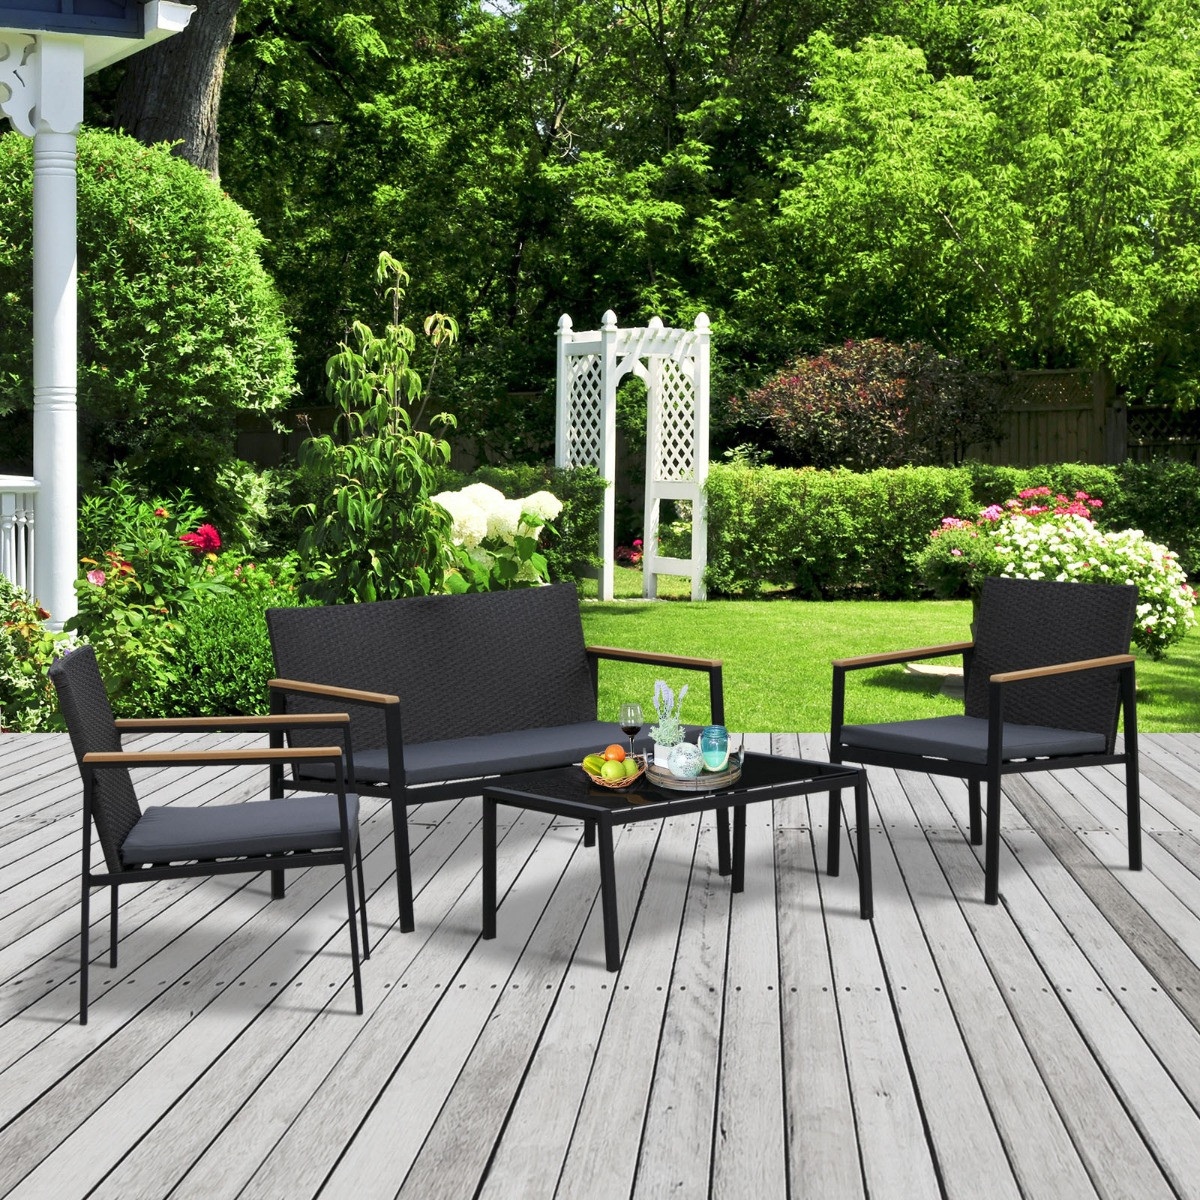 Outsunny Rattan Sofa And Chairs Set, 4 Piece - Black>